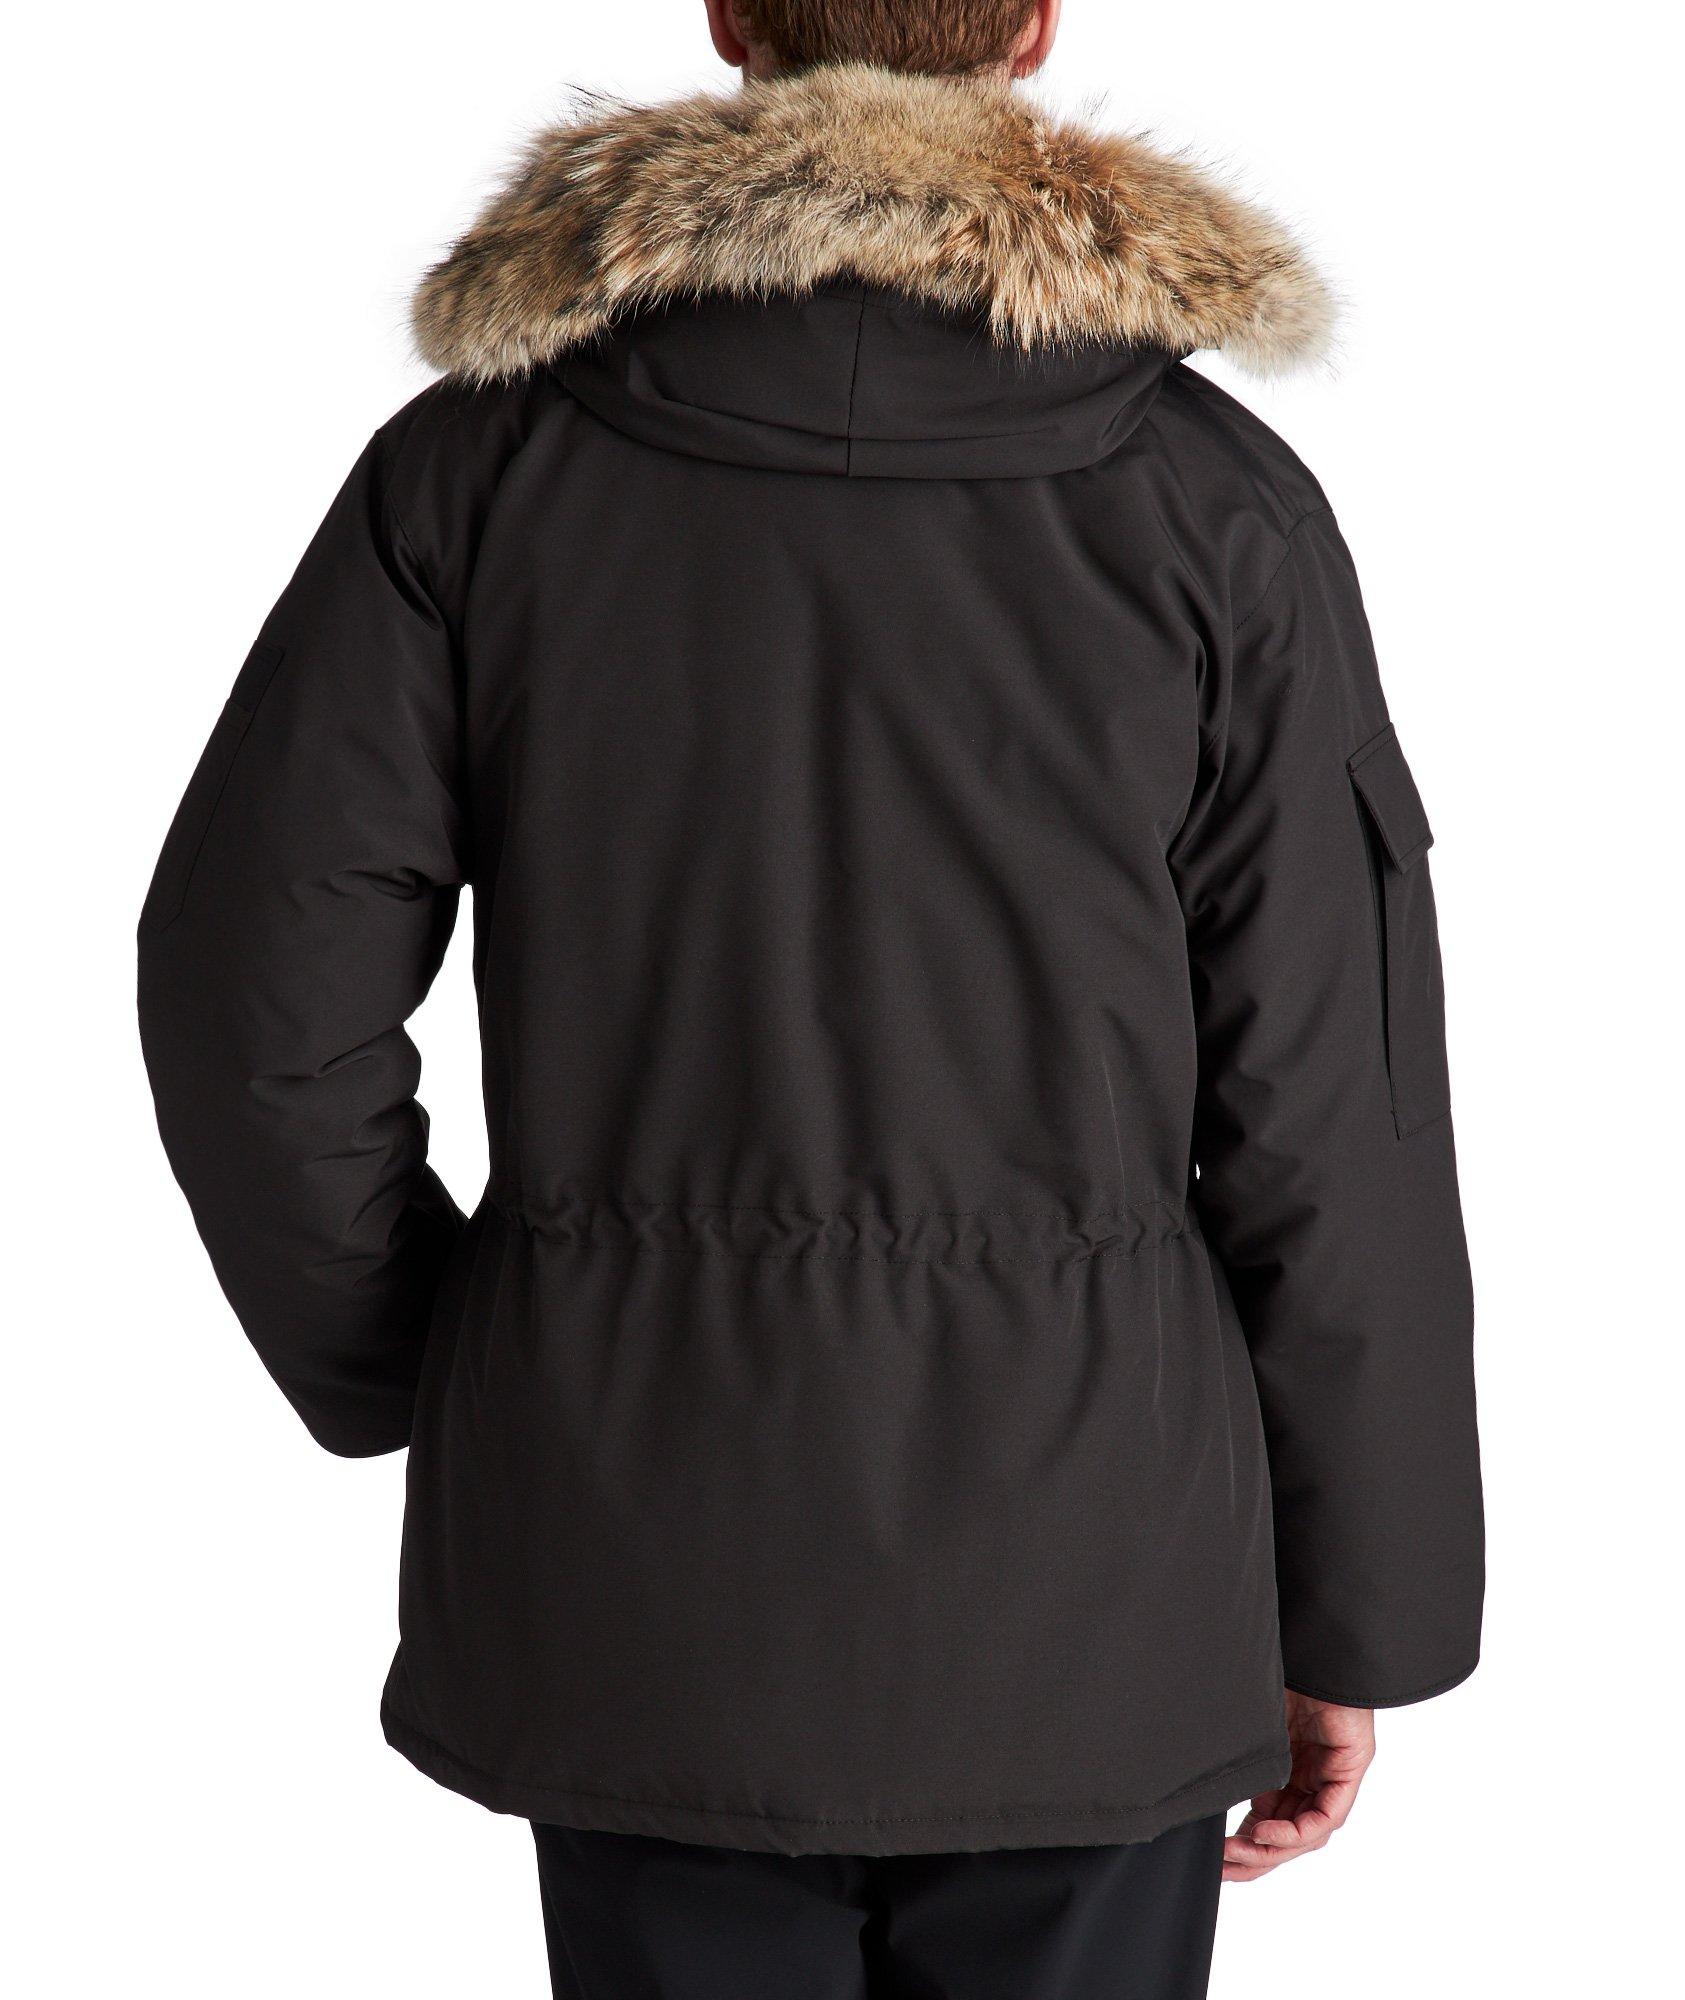 Expedition Parka Fusion Fit image 1